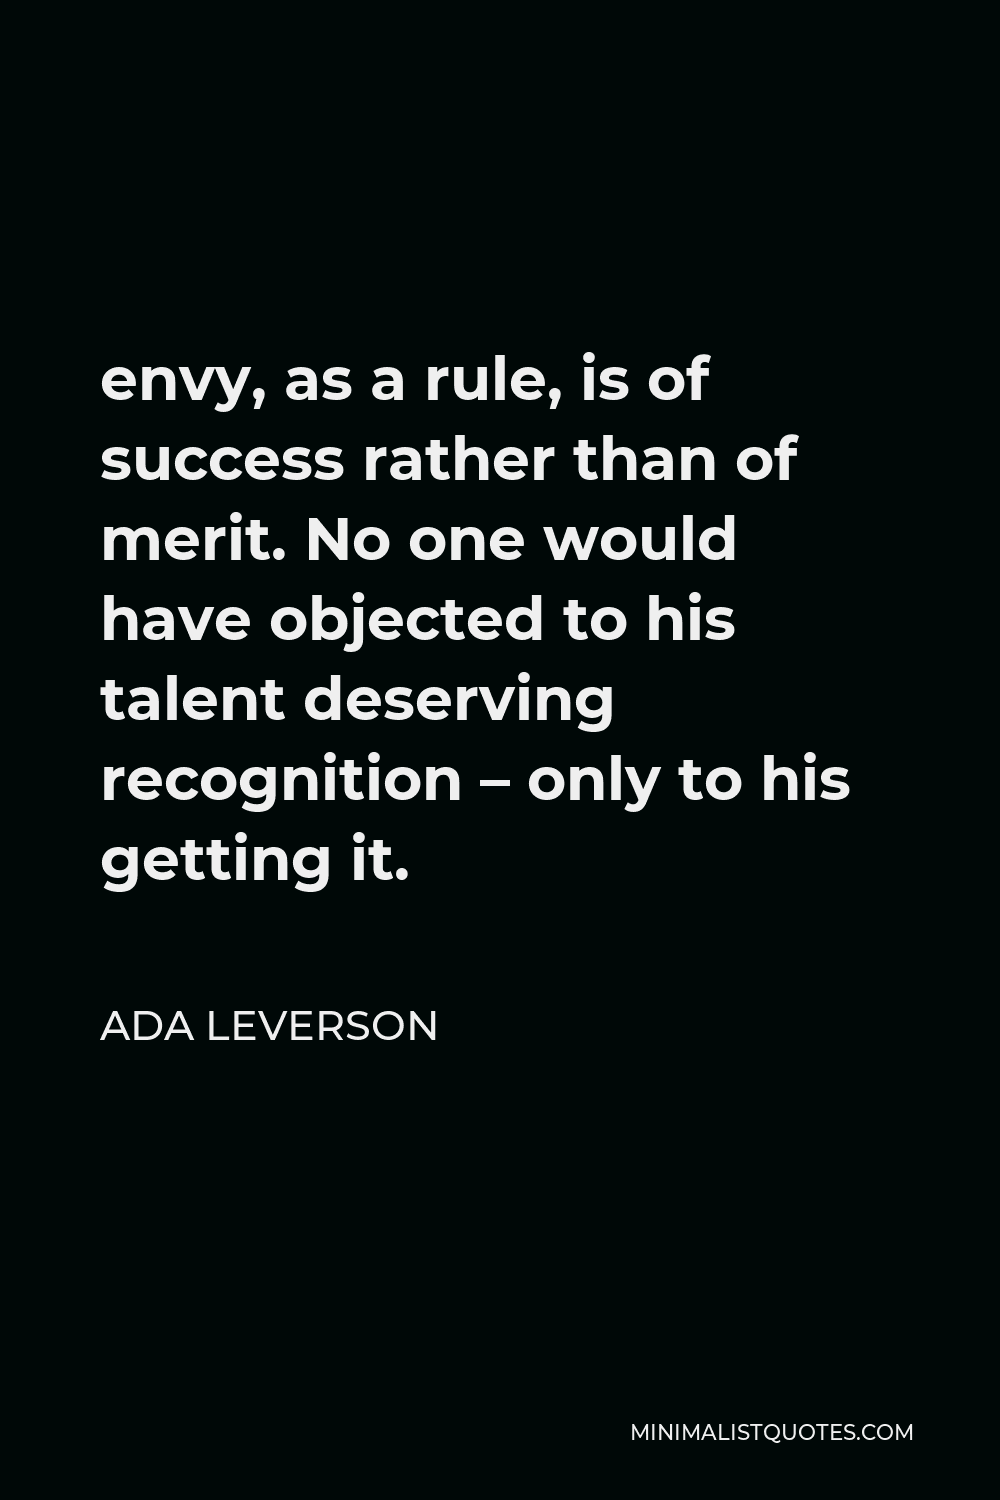 Ada Leverson Quote - envy, as a rule, is of success rather than of merit. No one would have objected to his talent deserving recognition – only to his getting it.